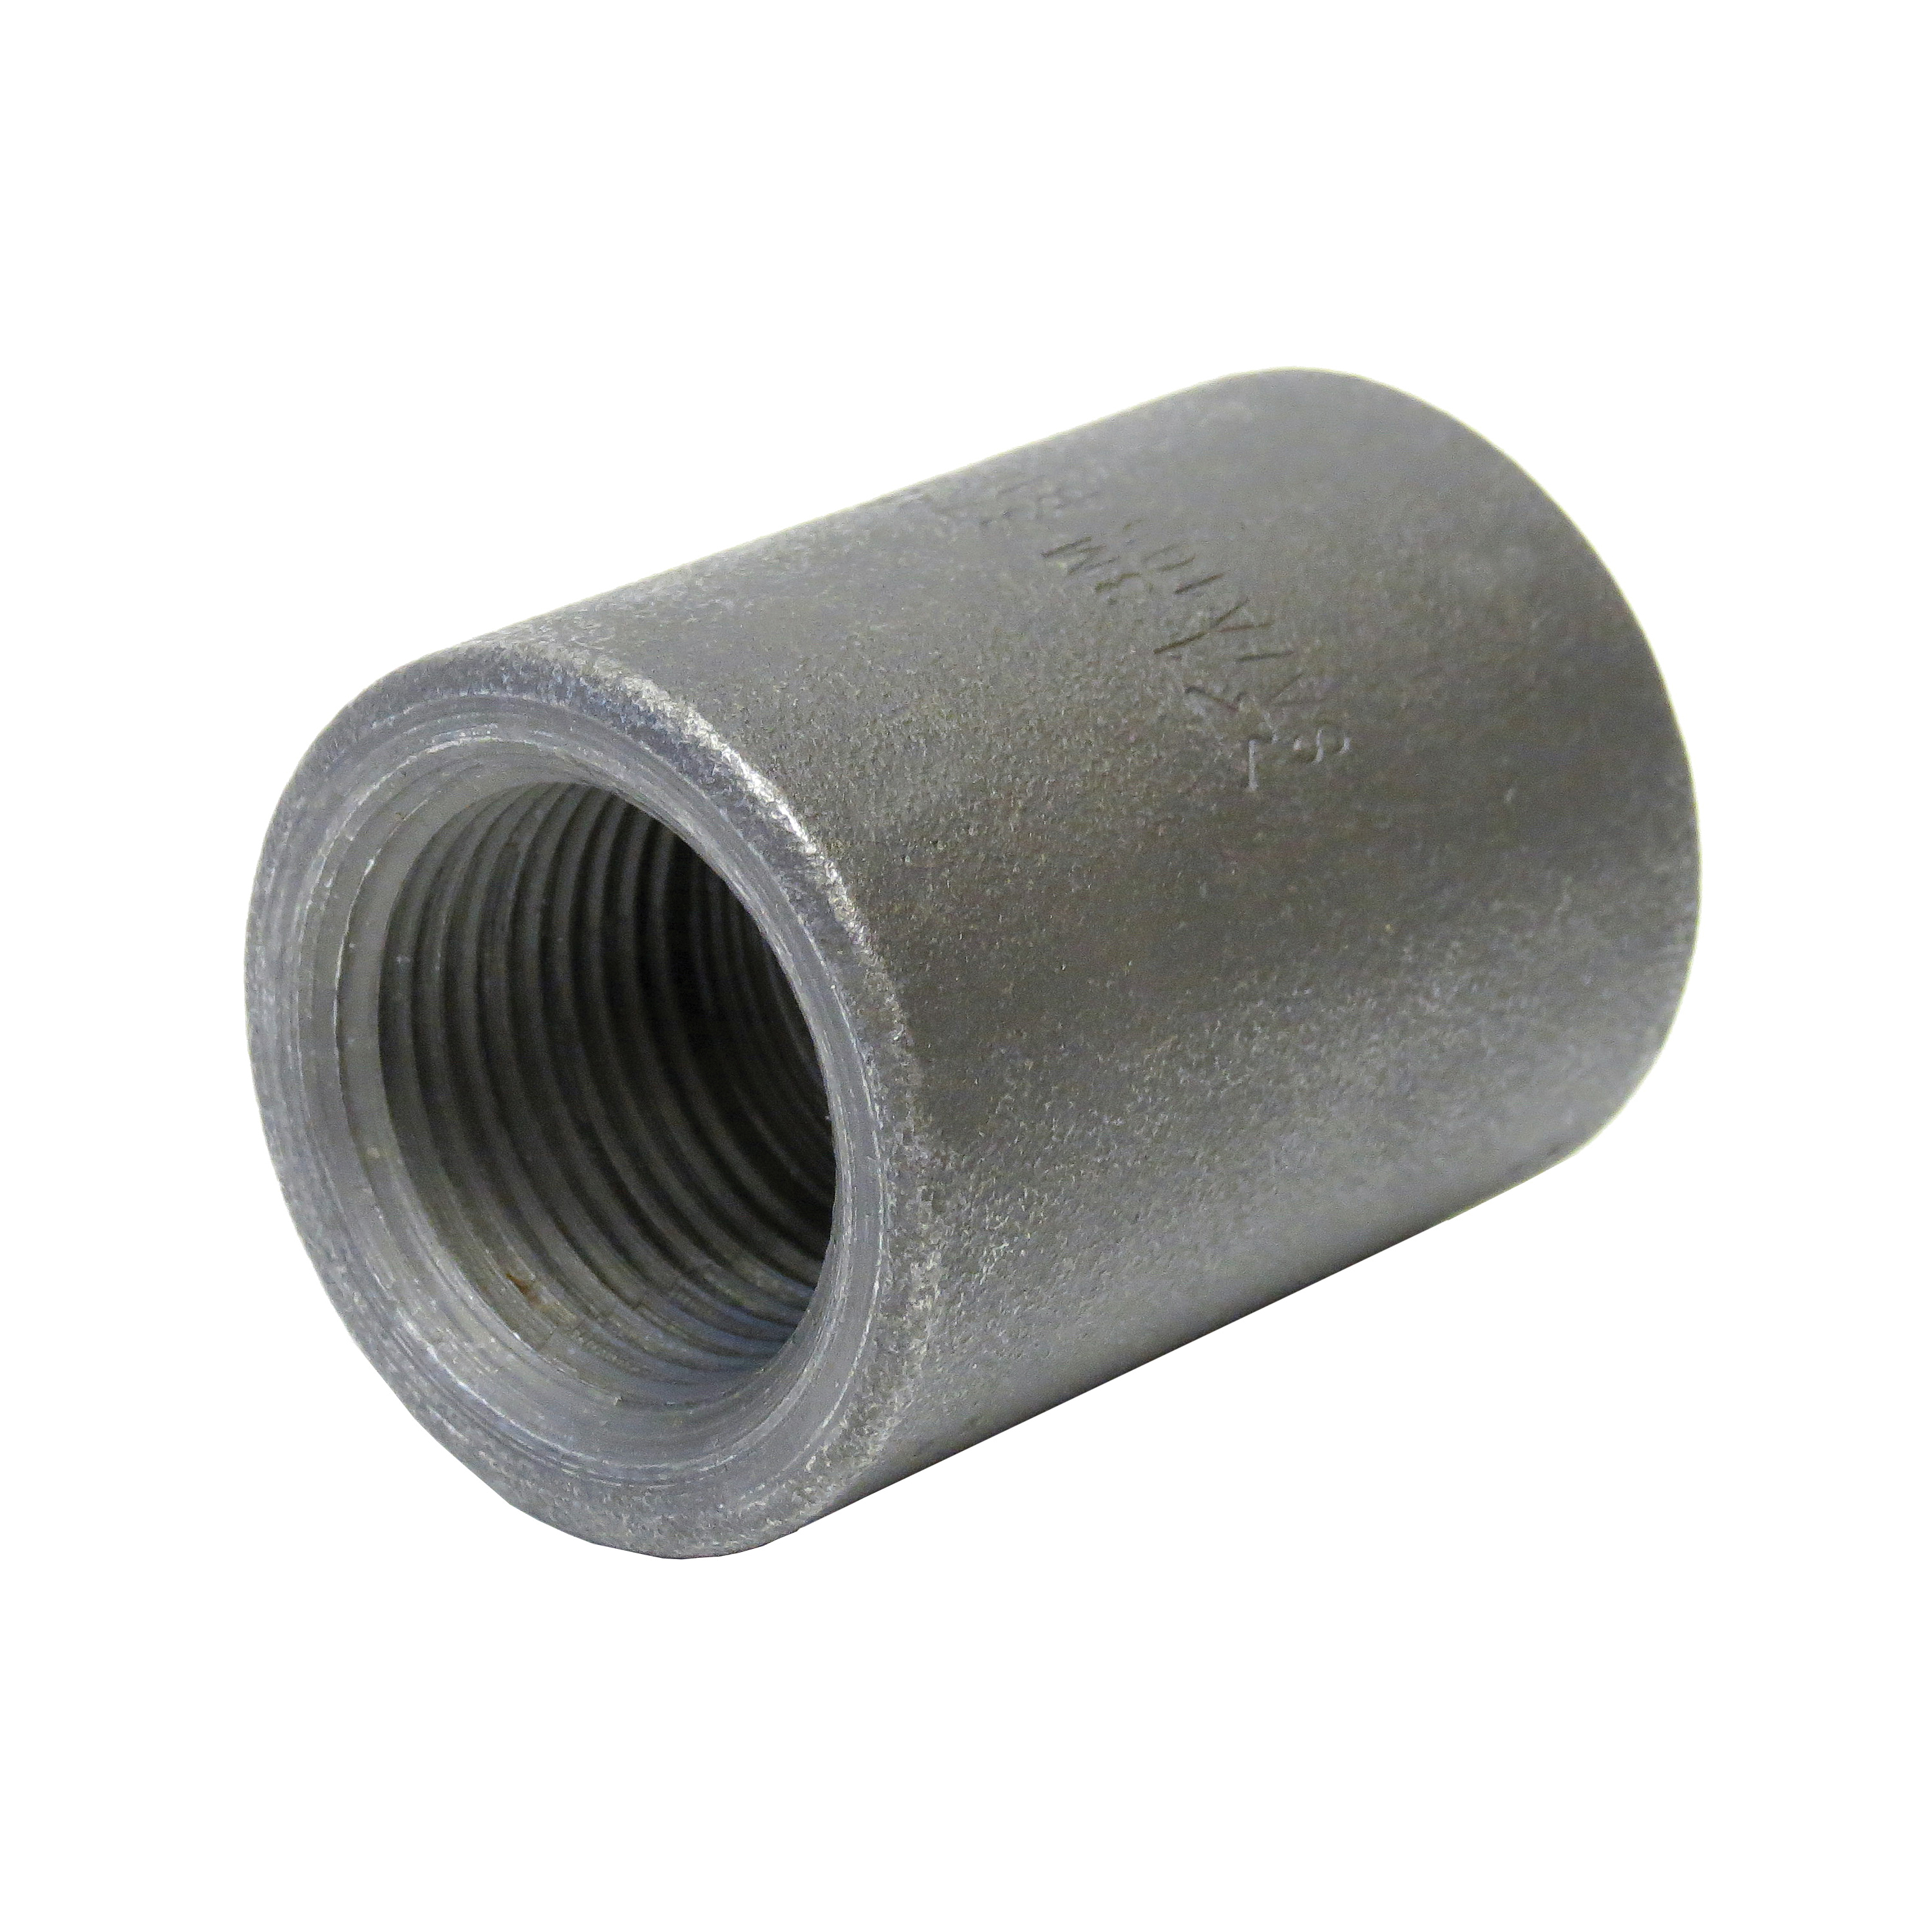 Anvil® 0361155609 FIG 2117 Pipe Coupling, 1/2 in Nominal, FNPT End Style, 3000 lb, Steel, Black Oxide, Domestic